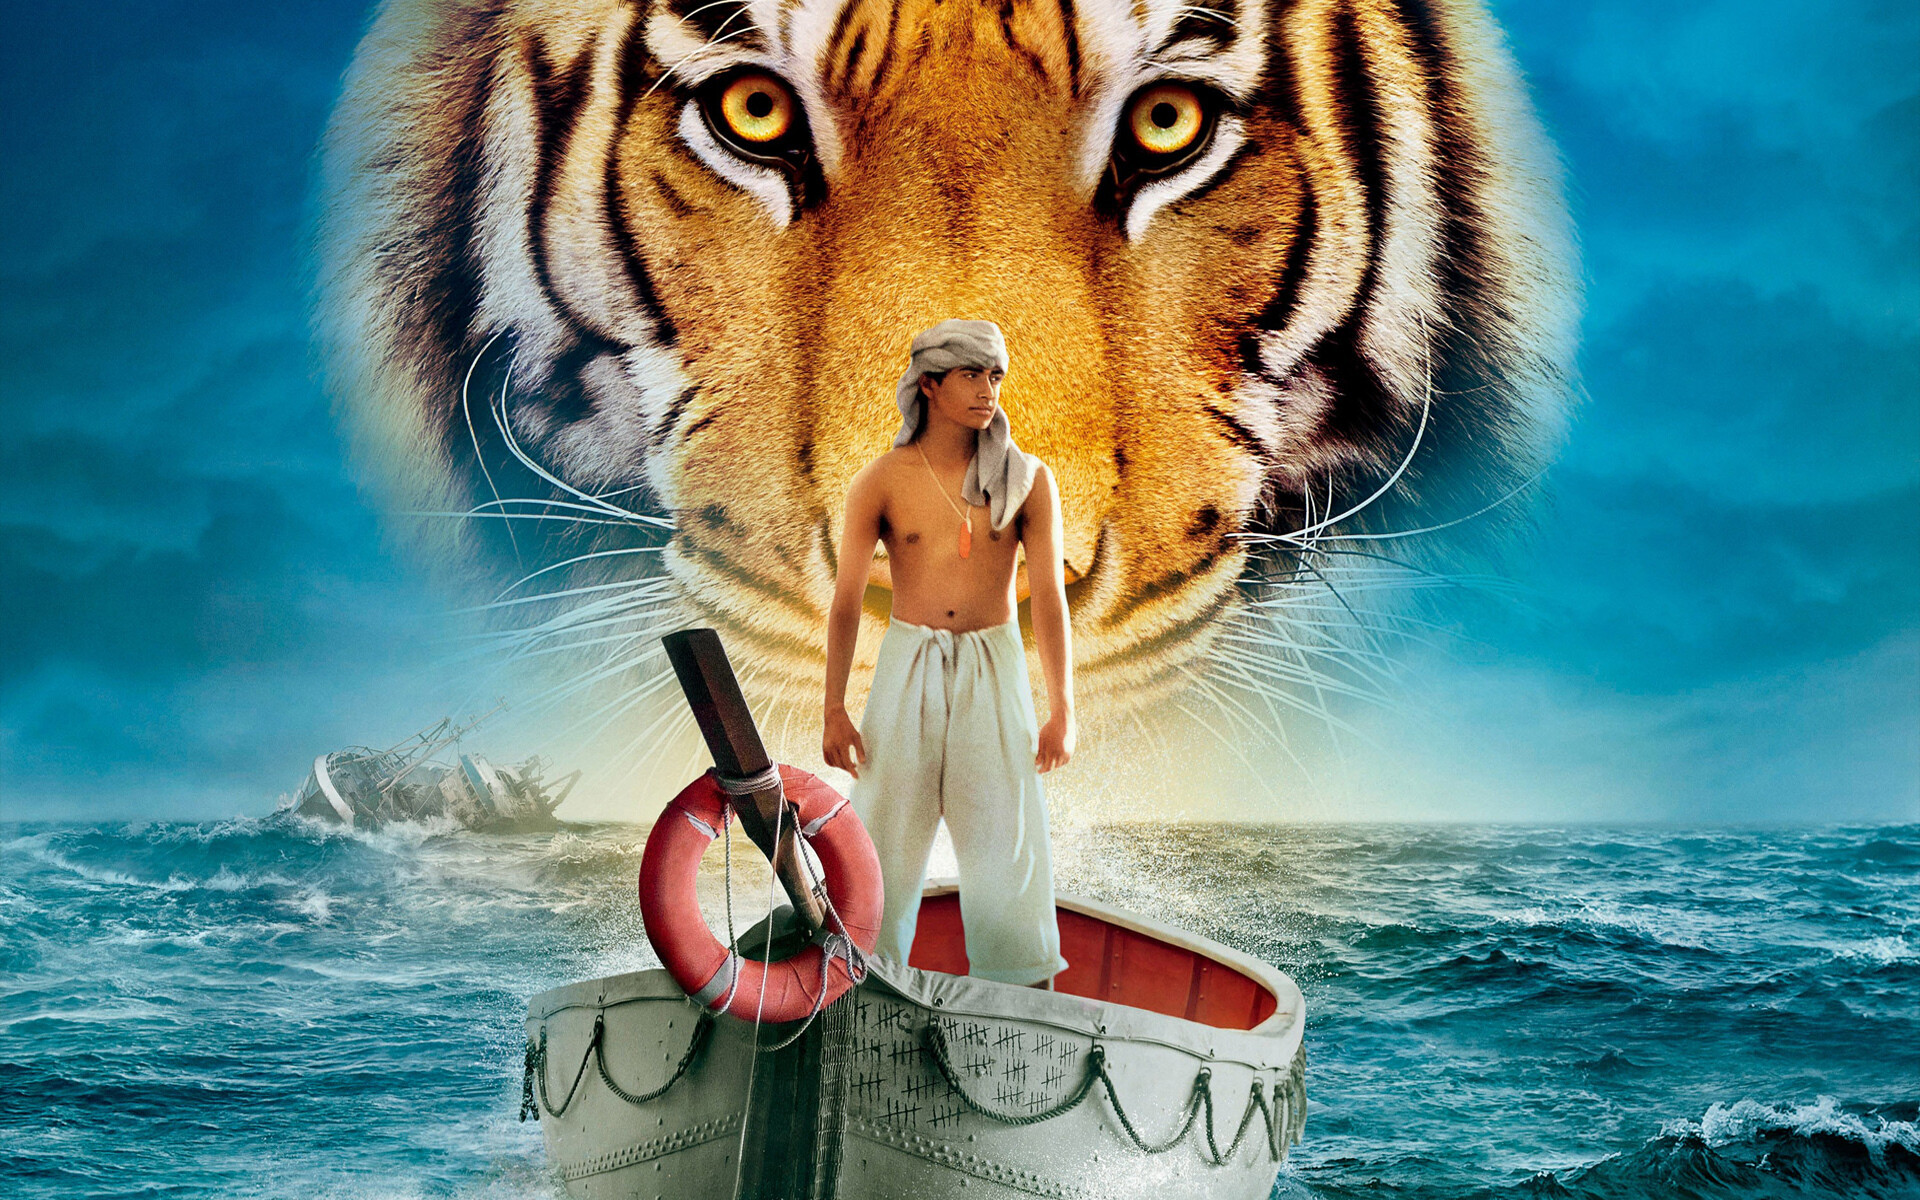 Life of Pi: The harrowing tale involves an Indian boy and a Bengal tiger on a lifeboat in the Pacific for several months, and as they battle each other for territorial superiority, the human and the animal begin to understand each other. 1920x1200 HD Wallpaper.